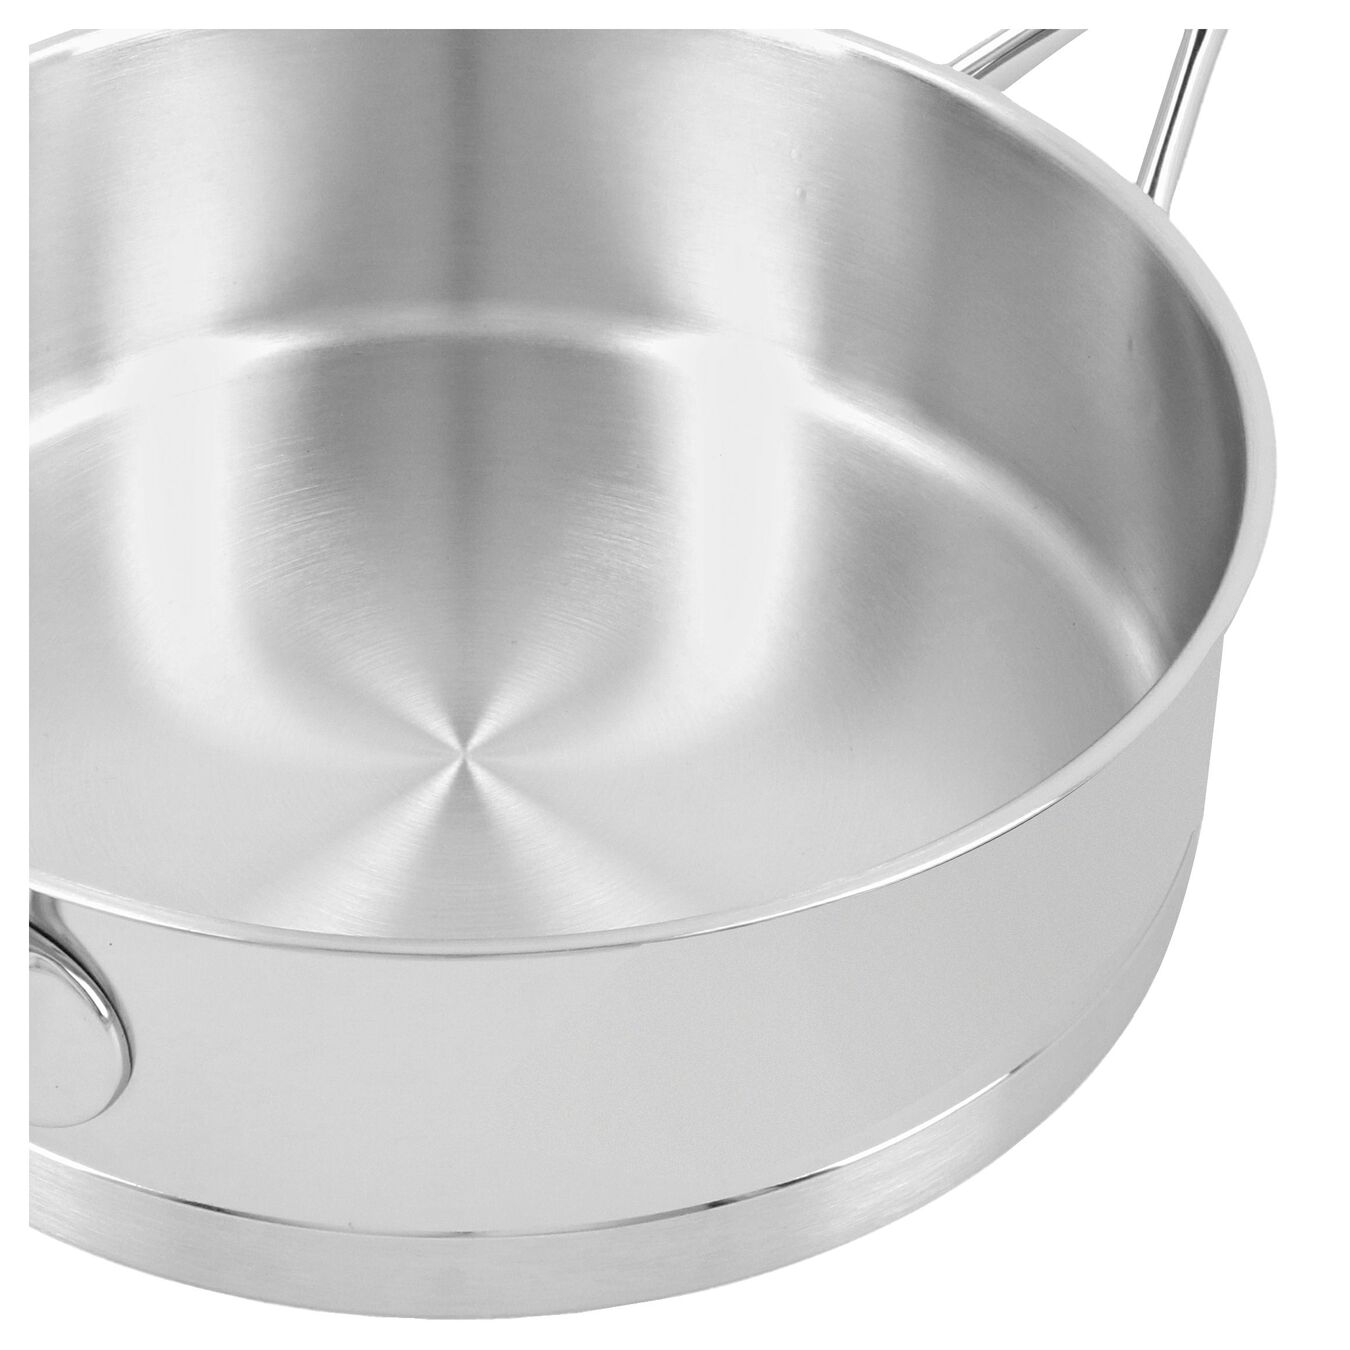 11-inch Sauté Pan with Helper Handle and Lid, 18/10 Stainless Steel ,,large 4